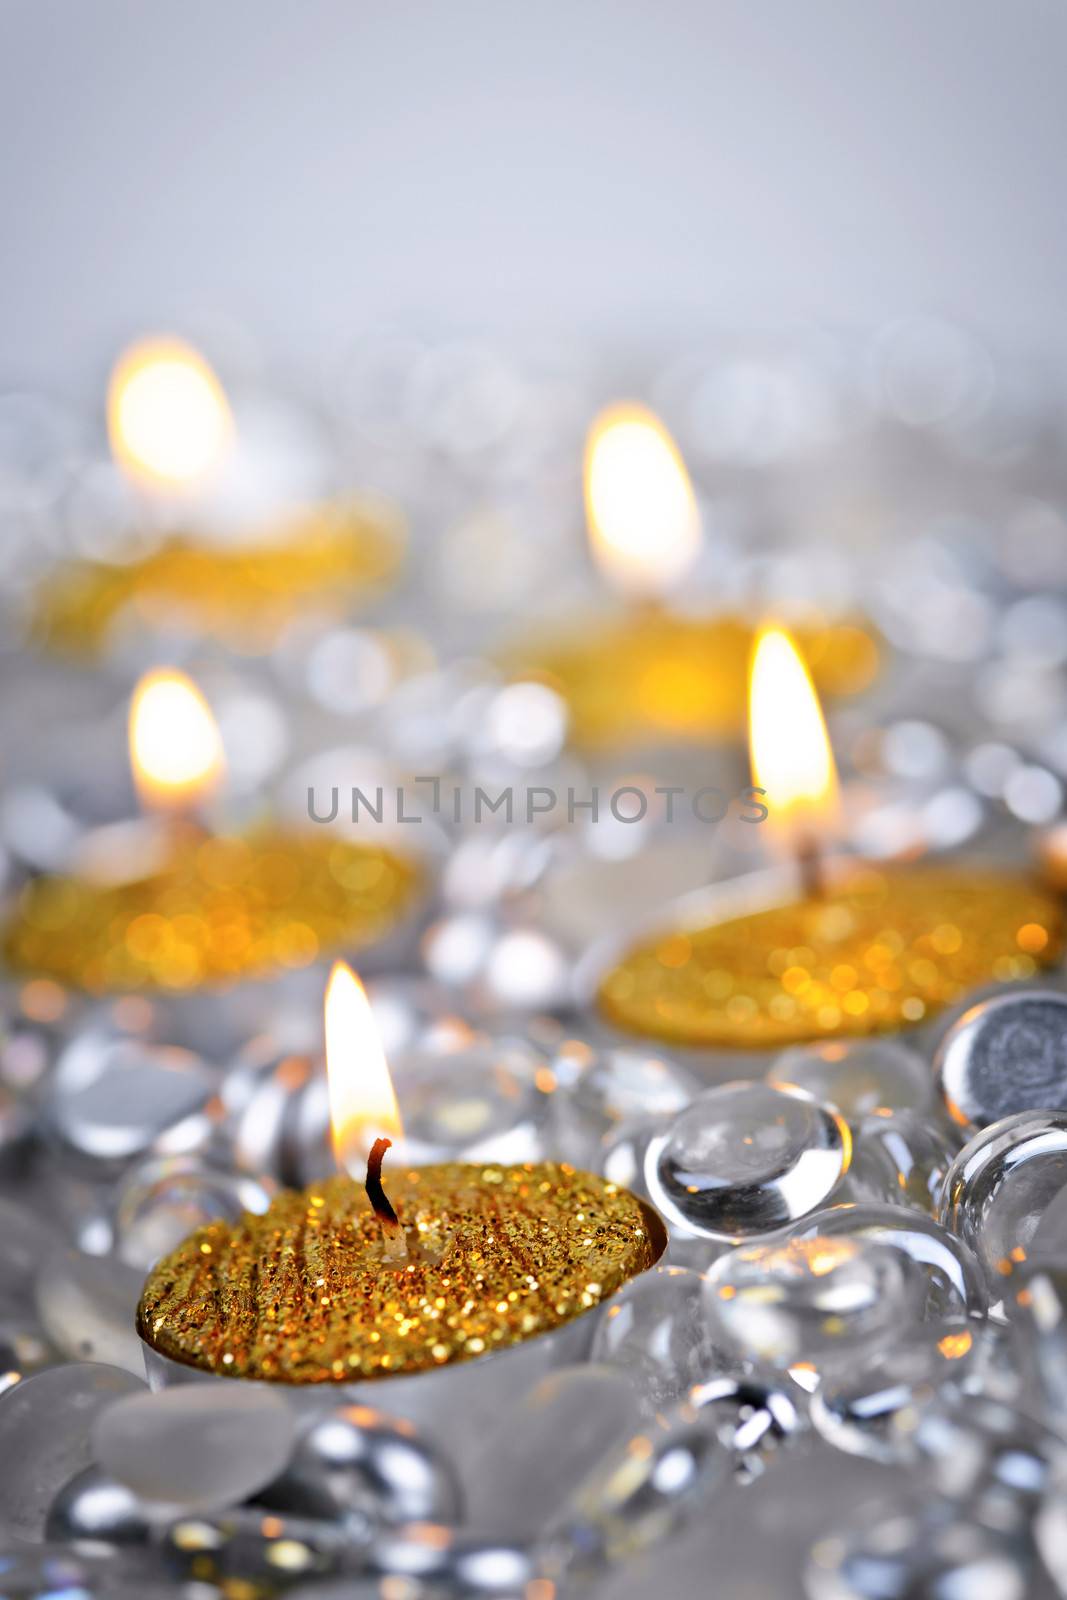 Burning golden decorative Christmas candles with glass beads